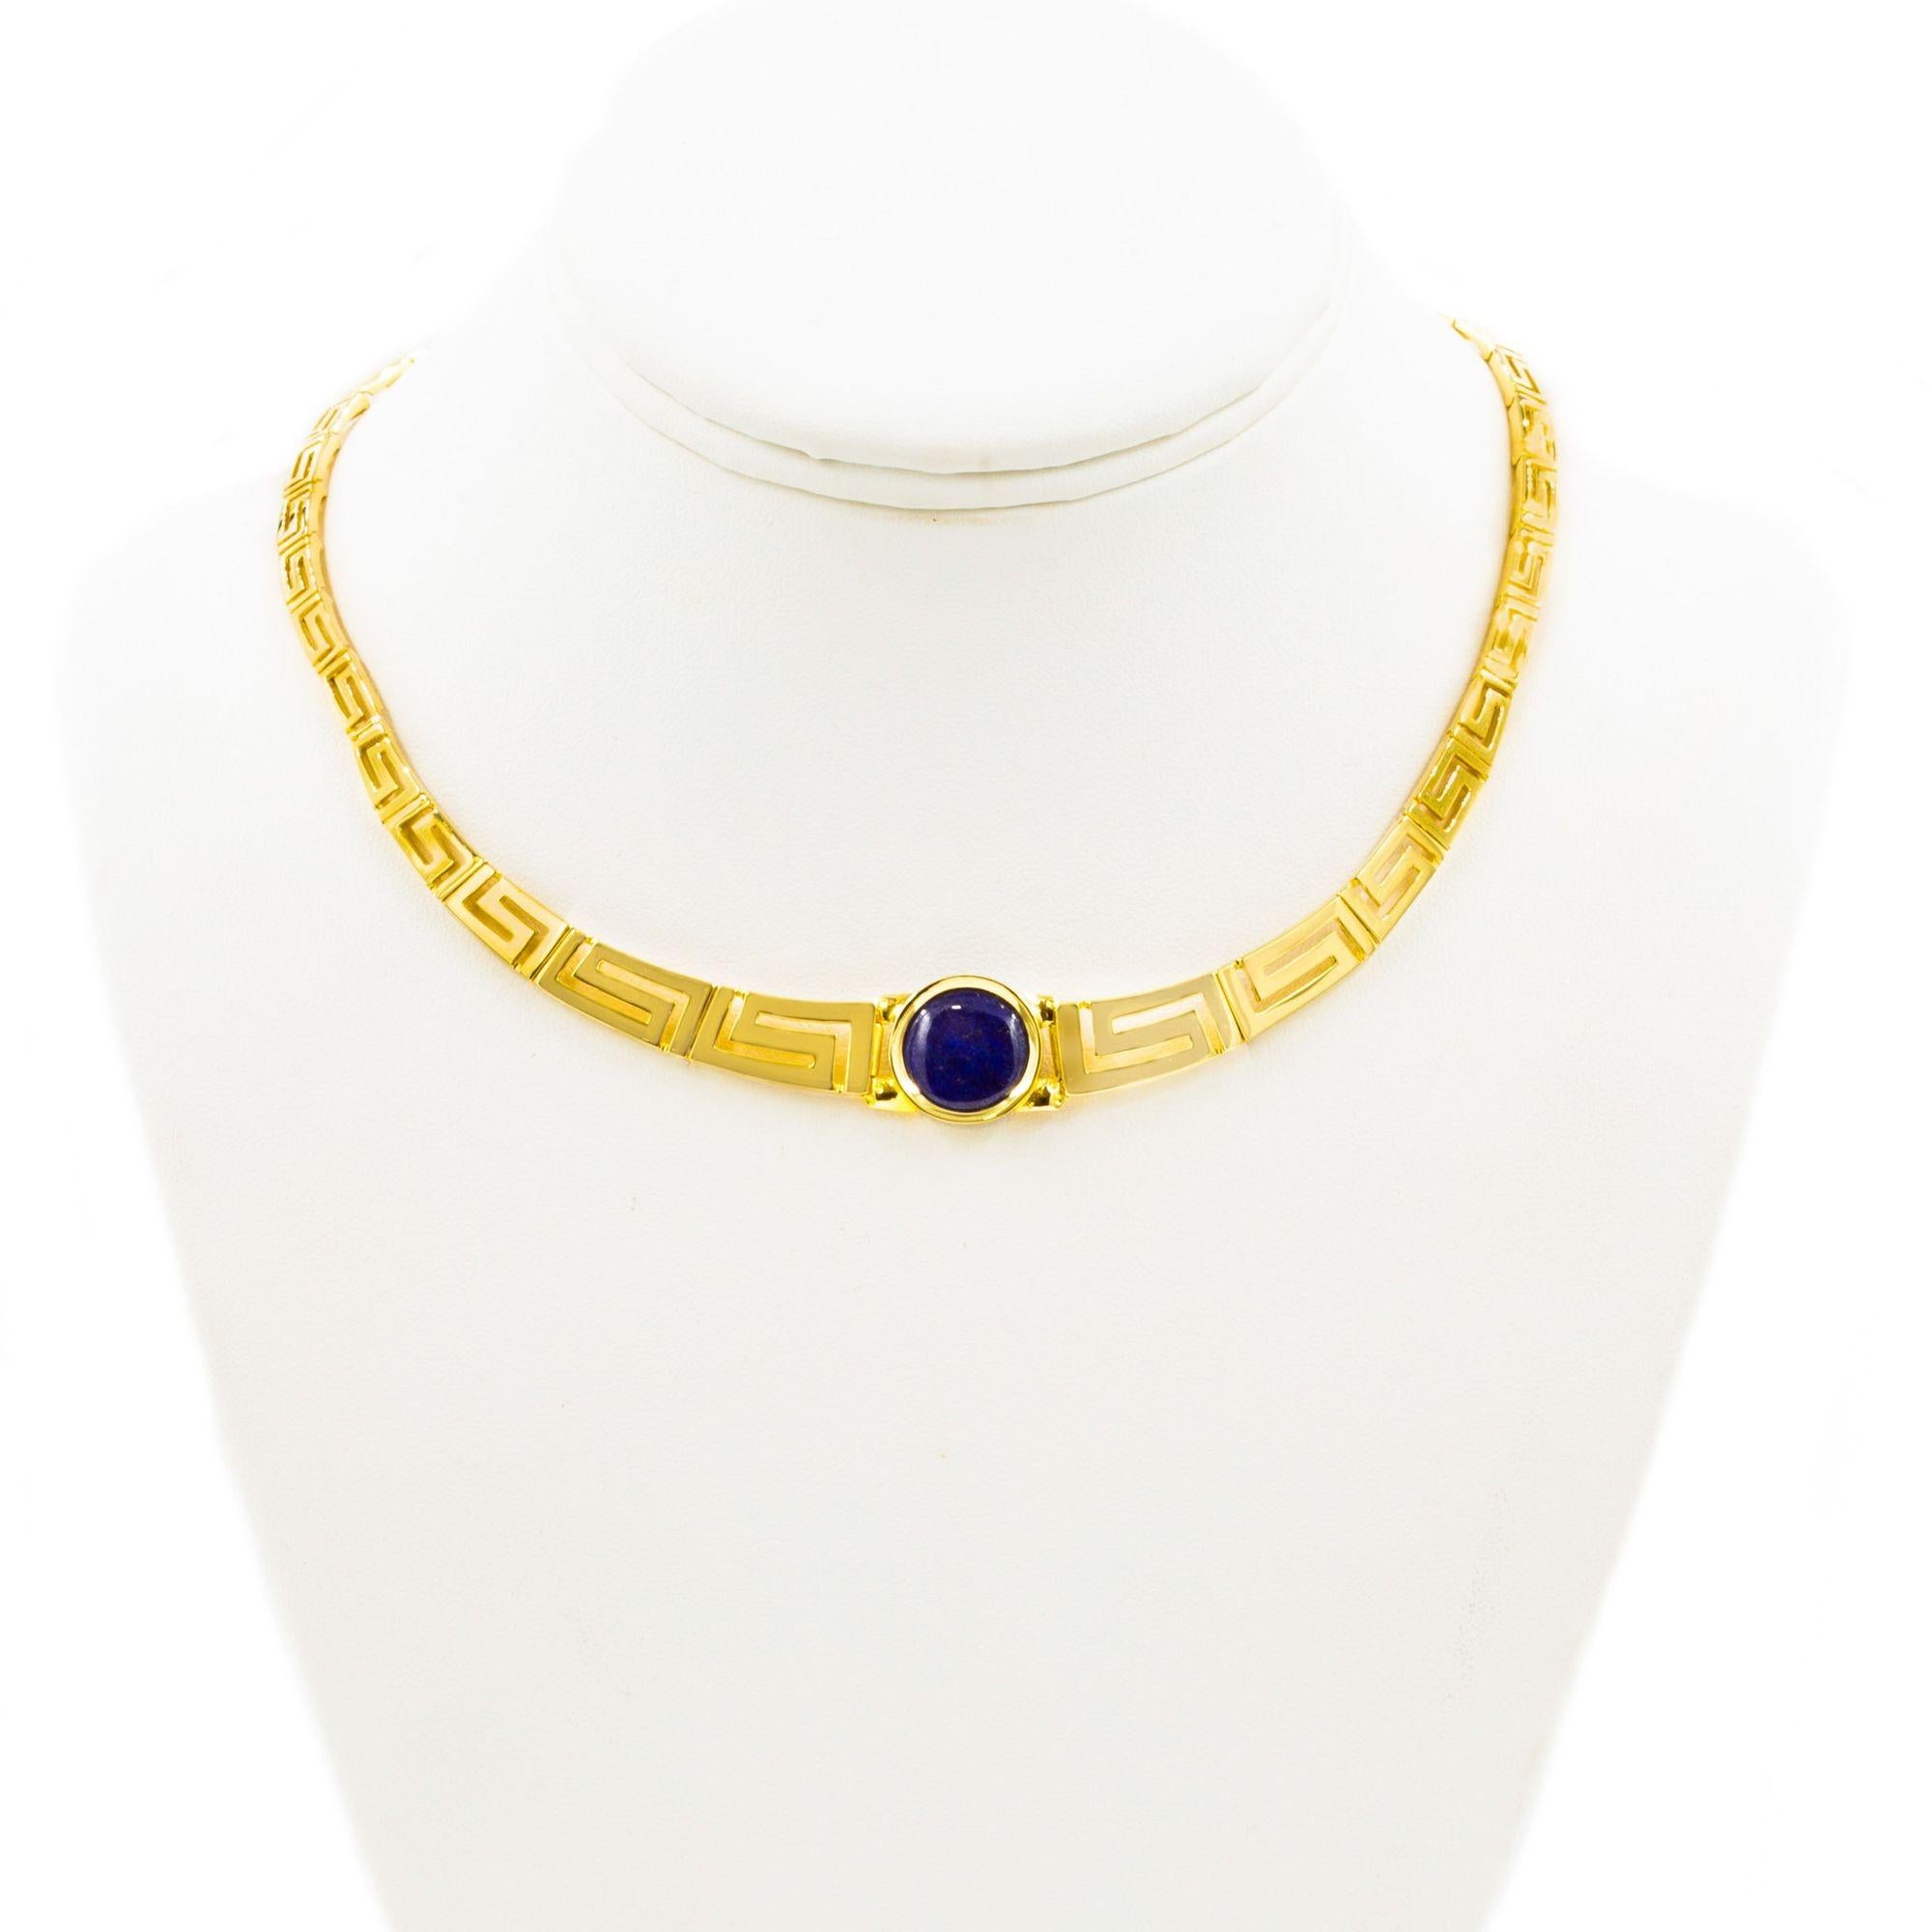 14K YELLOW GOLD GRADUATED GREEK-KEY LINK AND LAPIS LAZULI CHOKER NECKLACE
Item # C104270 

A delightful vintage choker necklace with Greek-Key individually cast graduated links executed entirely in 14 karat yellow gd that build up to a centermost